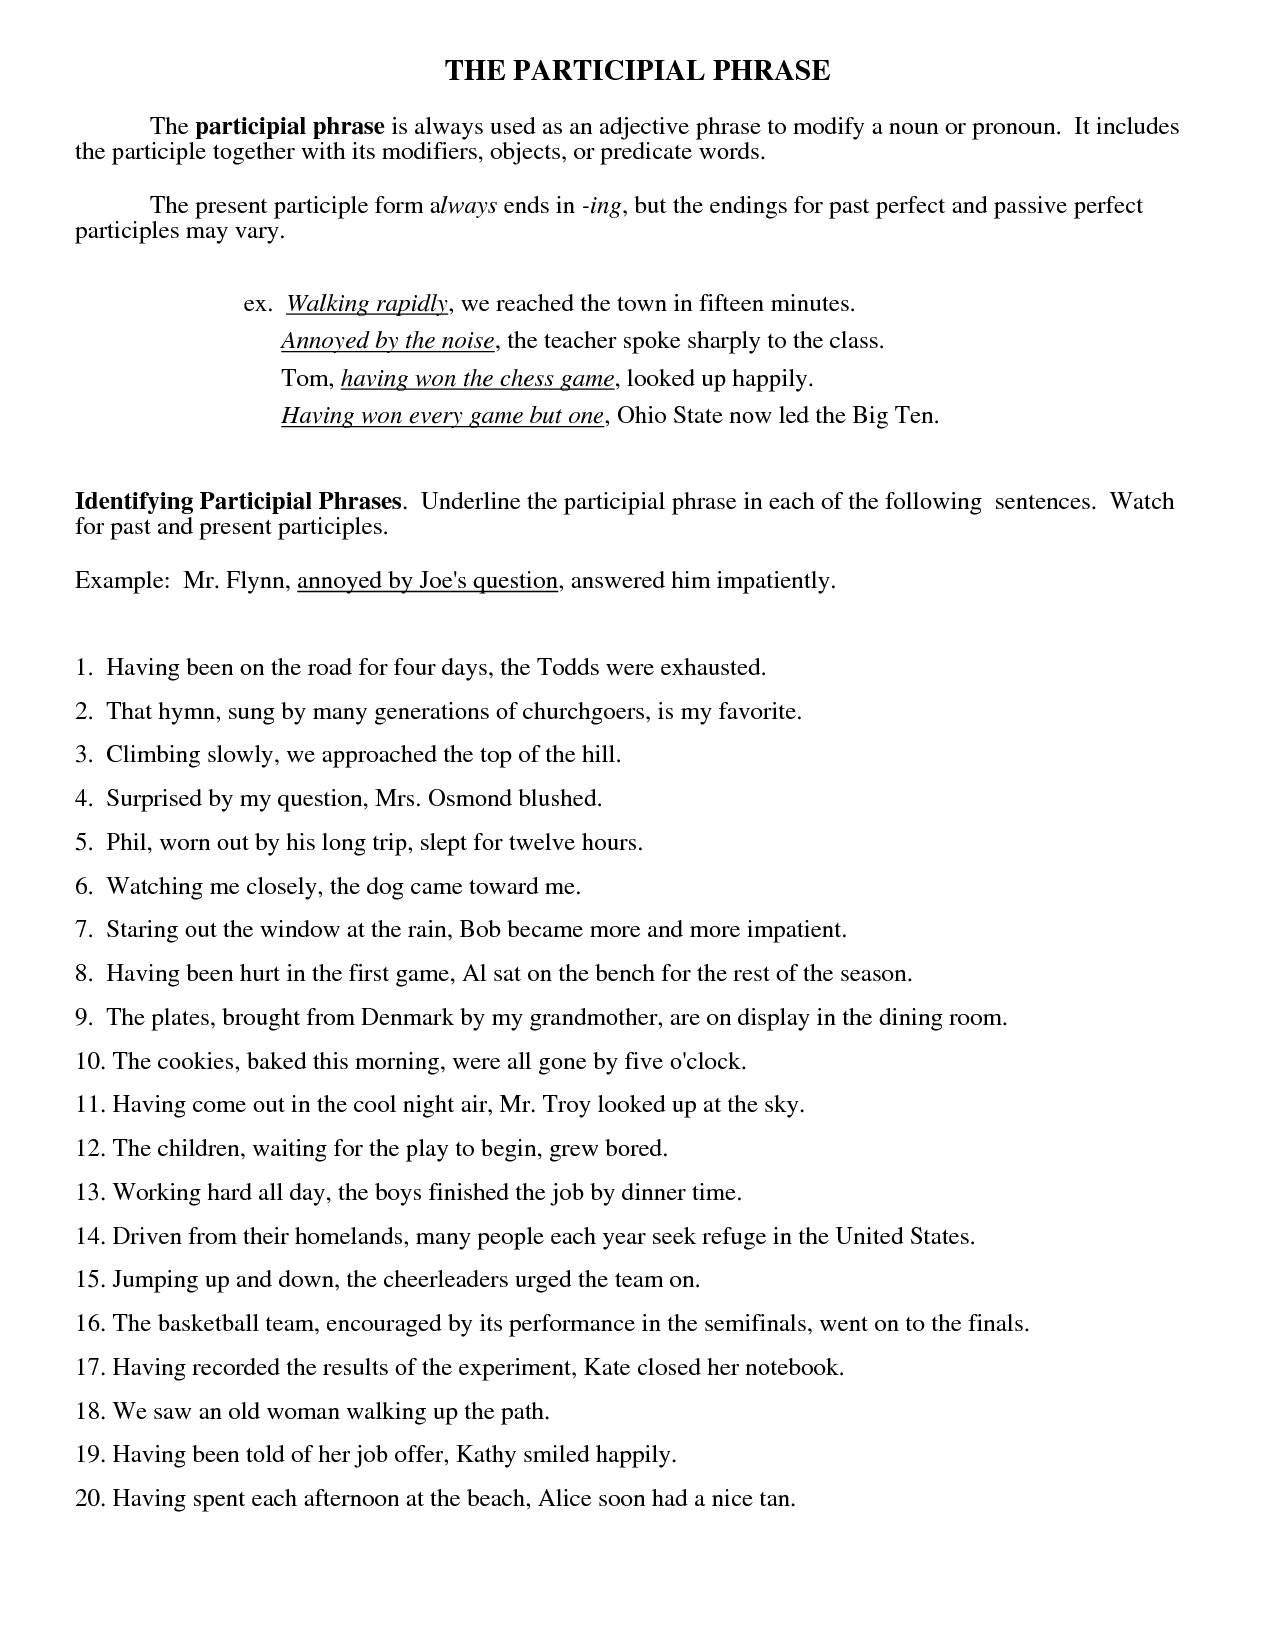 15 Best Images of Participle Phrase Worksheets And Answers - Gerund and ...